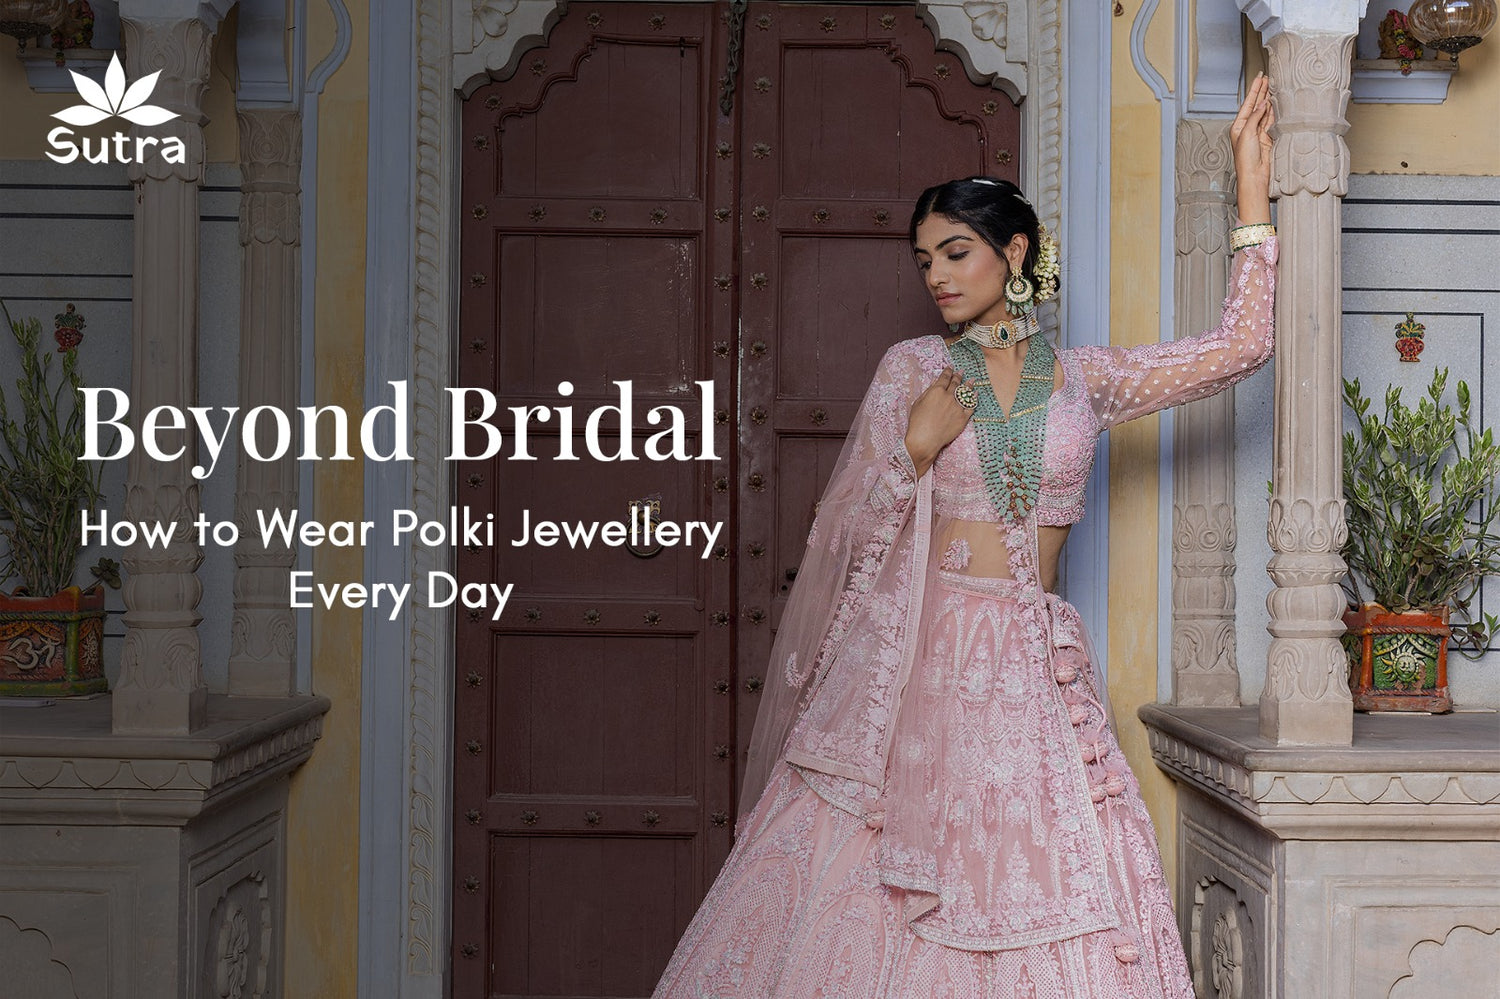 Beyond Bridal: How to Wear Polki Jewellery Every Day